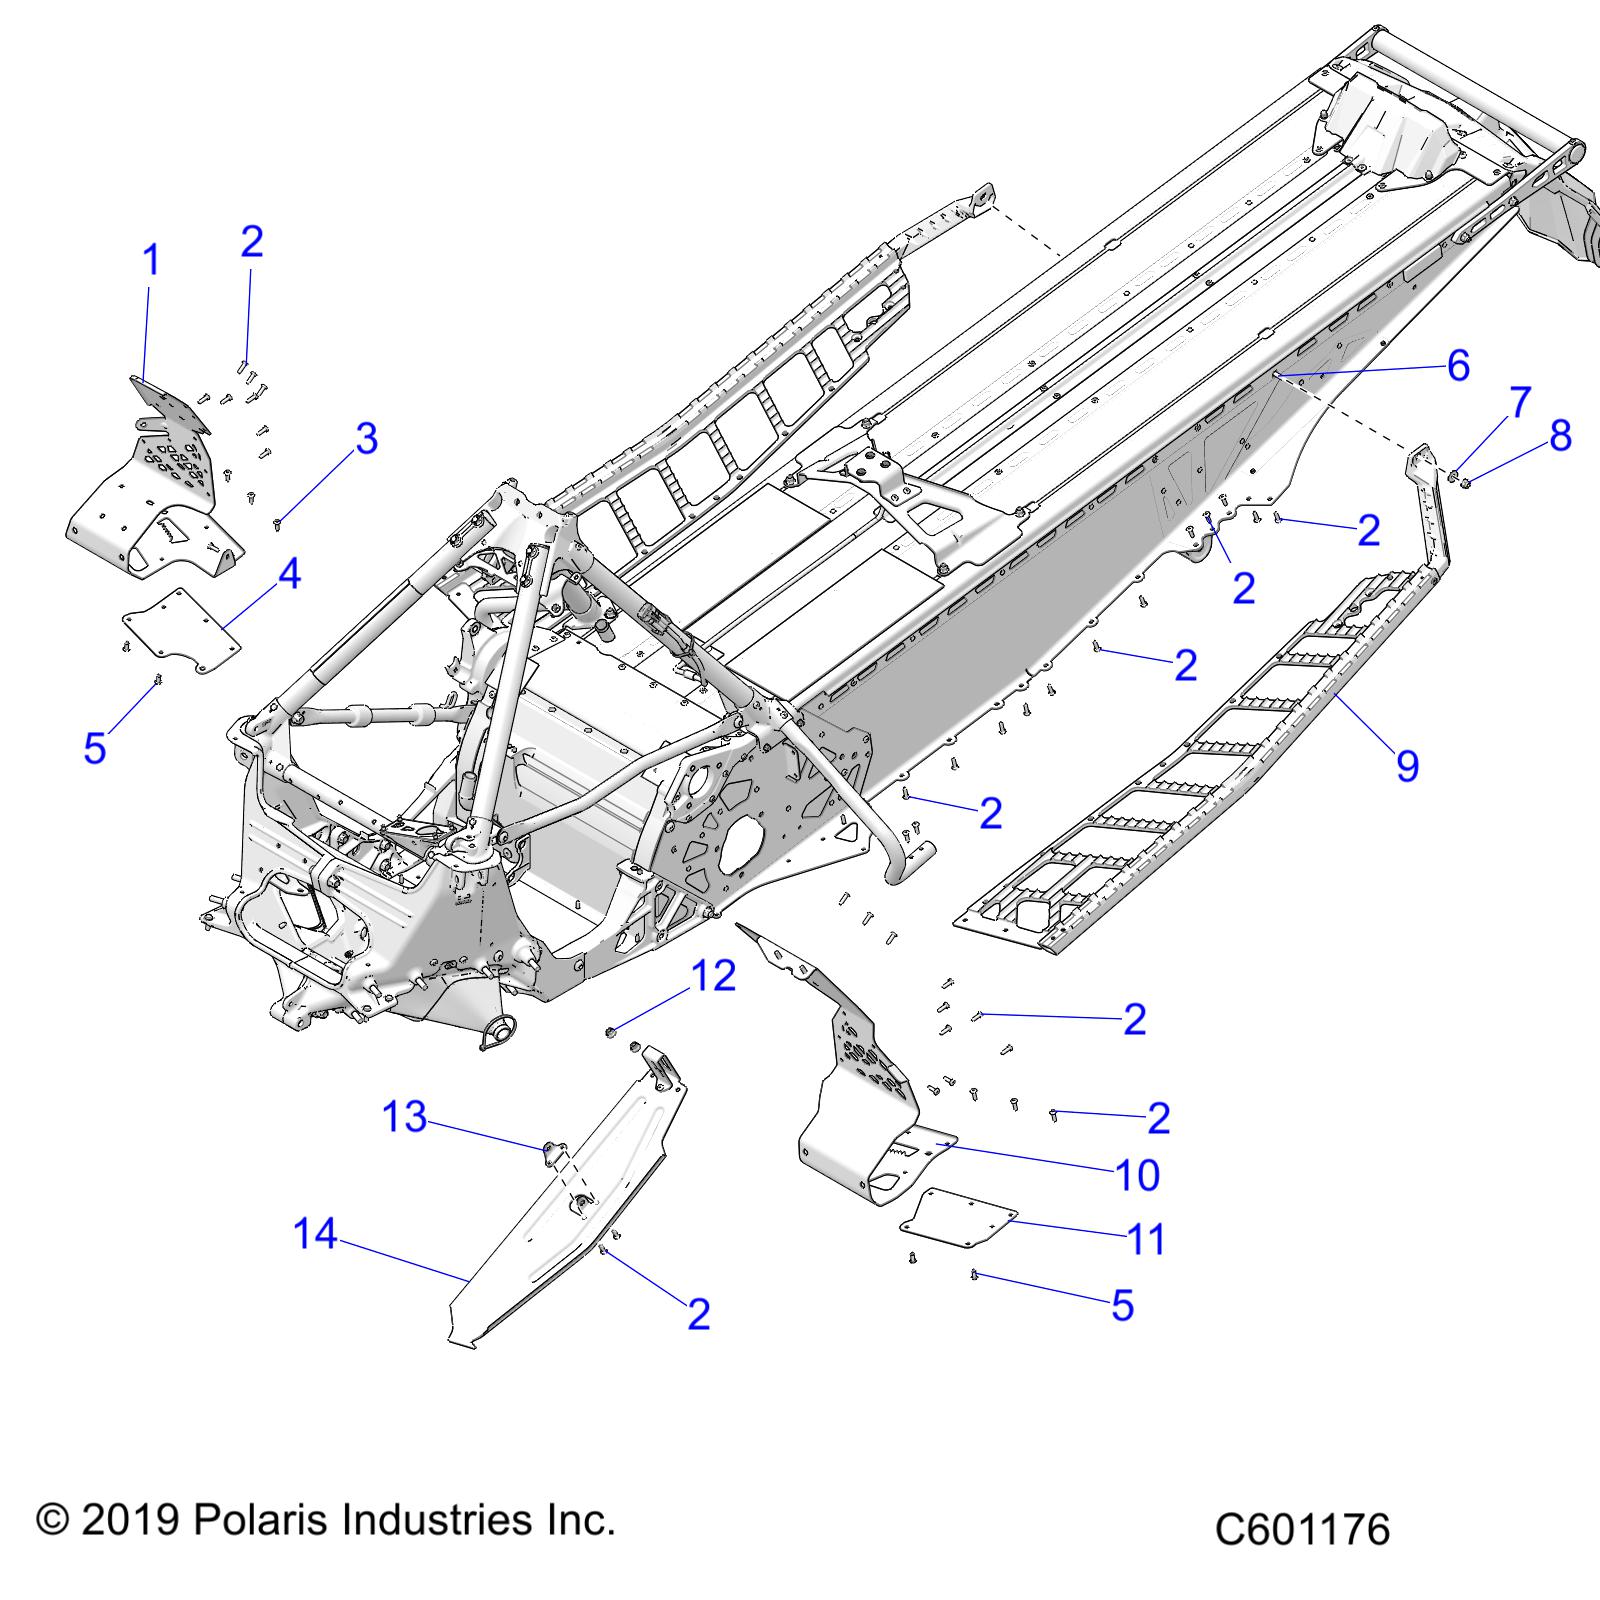 CHASSIS, CLUTCH GUARD, FOOTRESTS, and RUNNINGBOARDS - S21EEC8RS ALL OPTIONS (C601176)